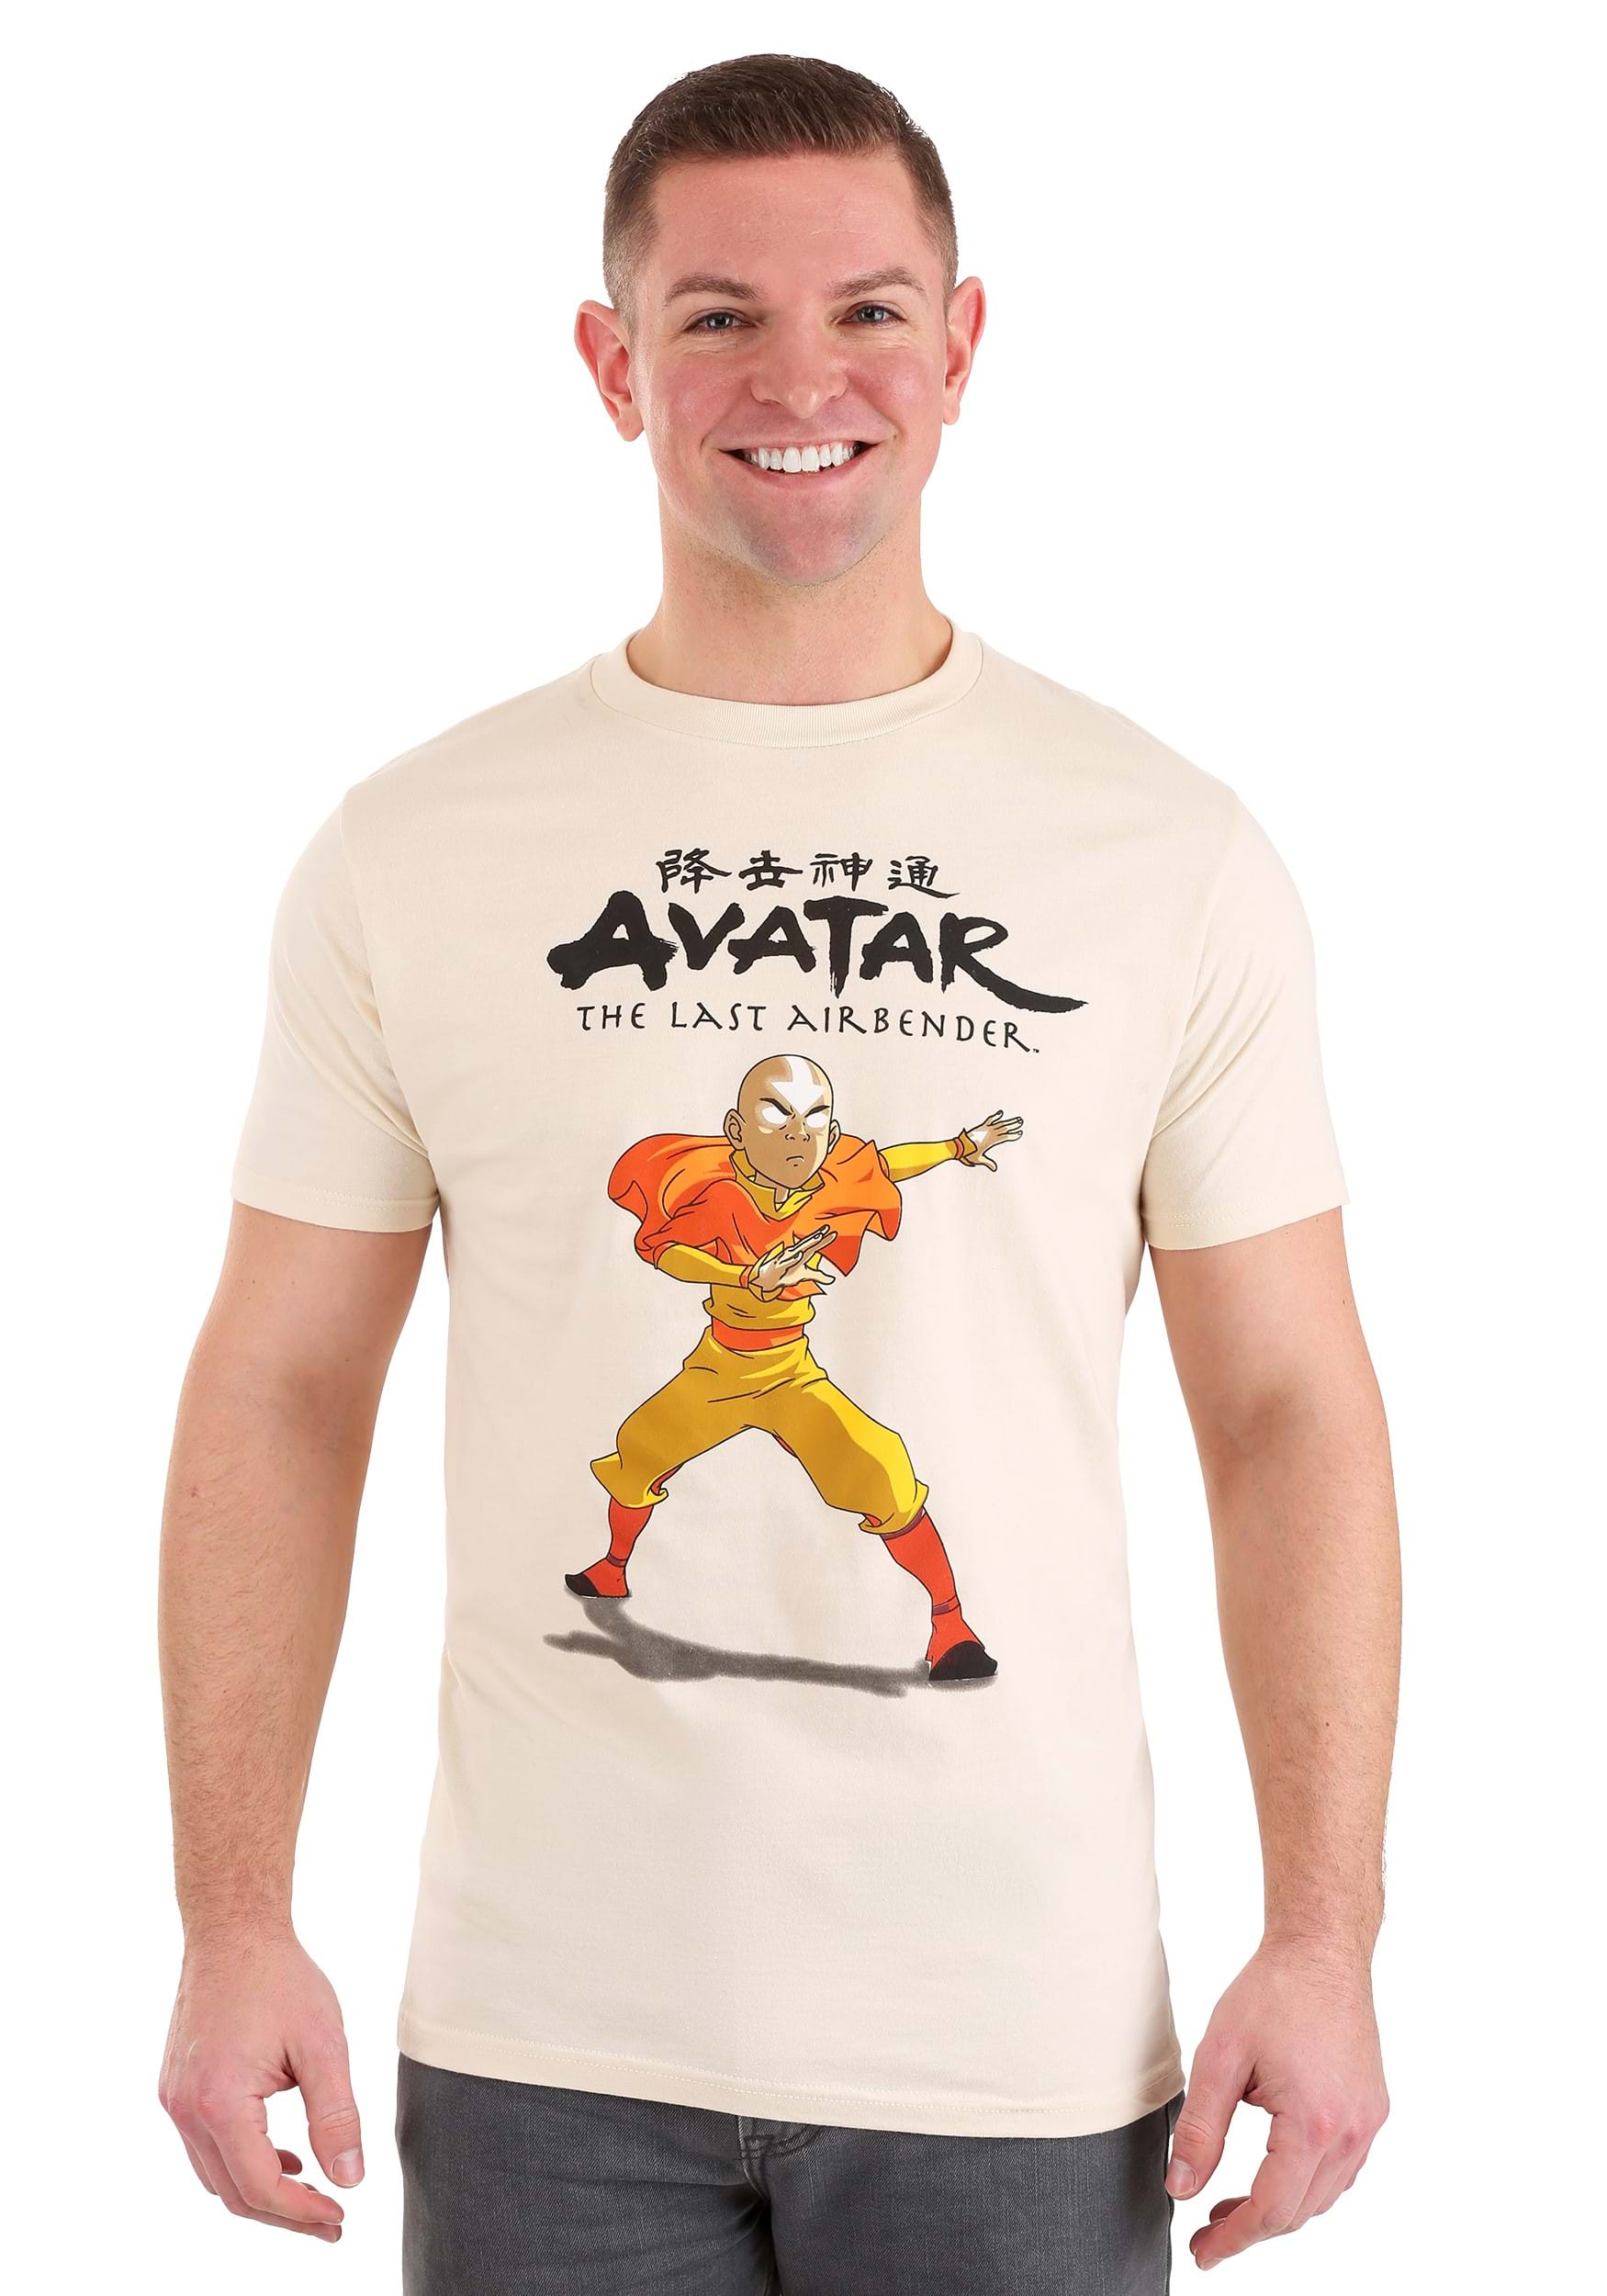 Avatar The Last Airbender Merch  Gifts for Sale  Redbubble